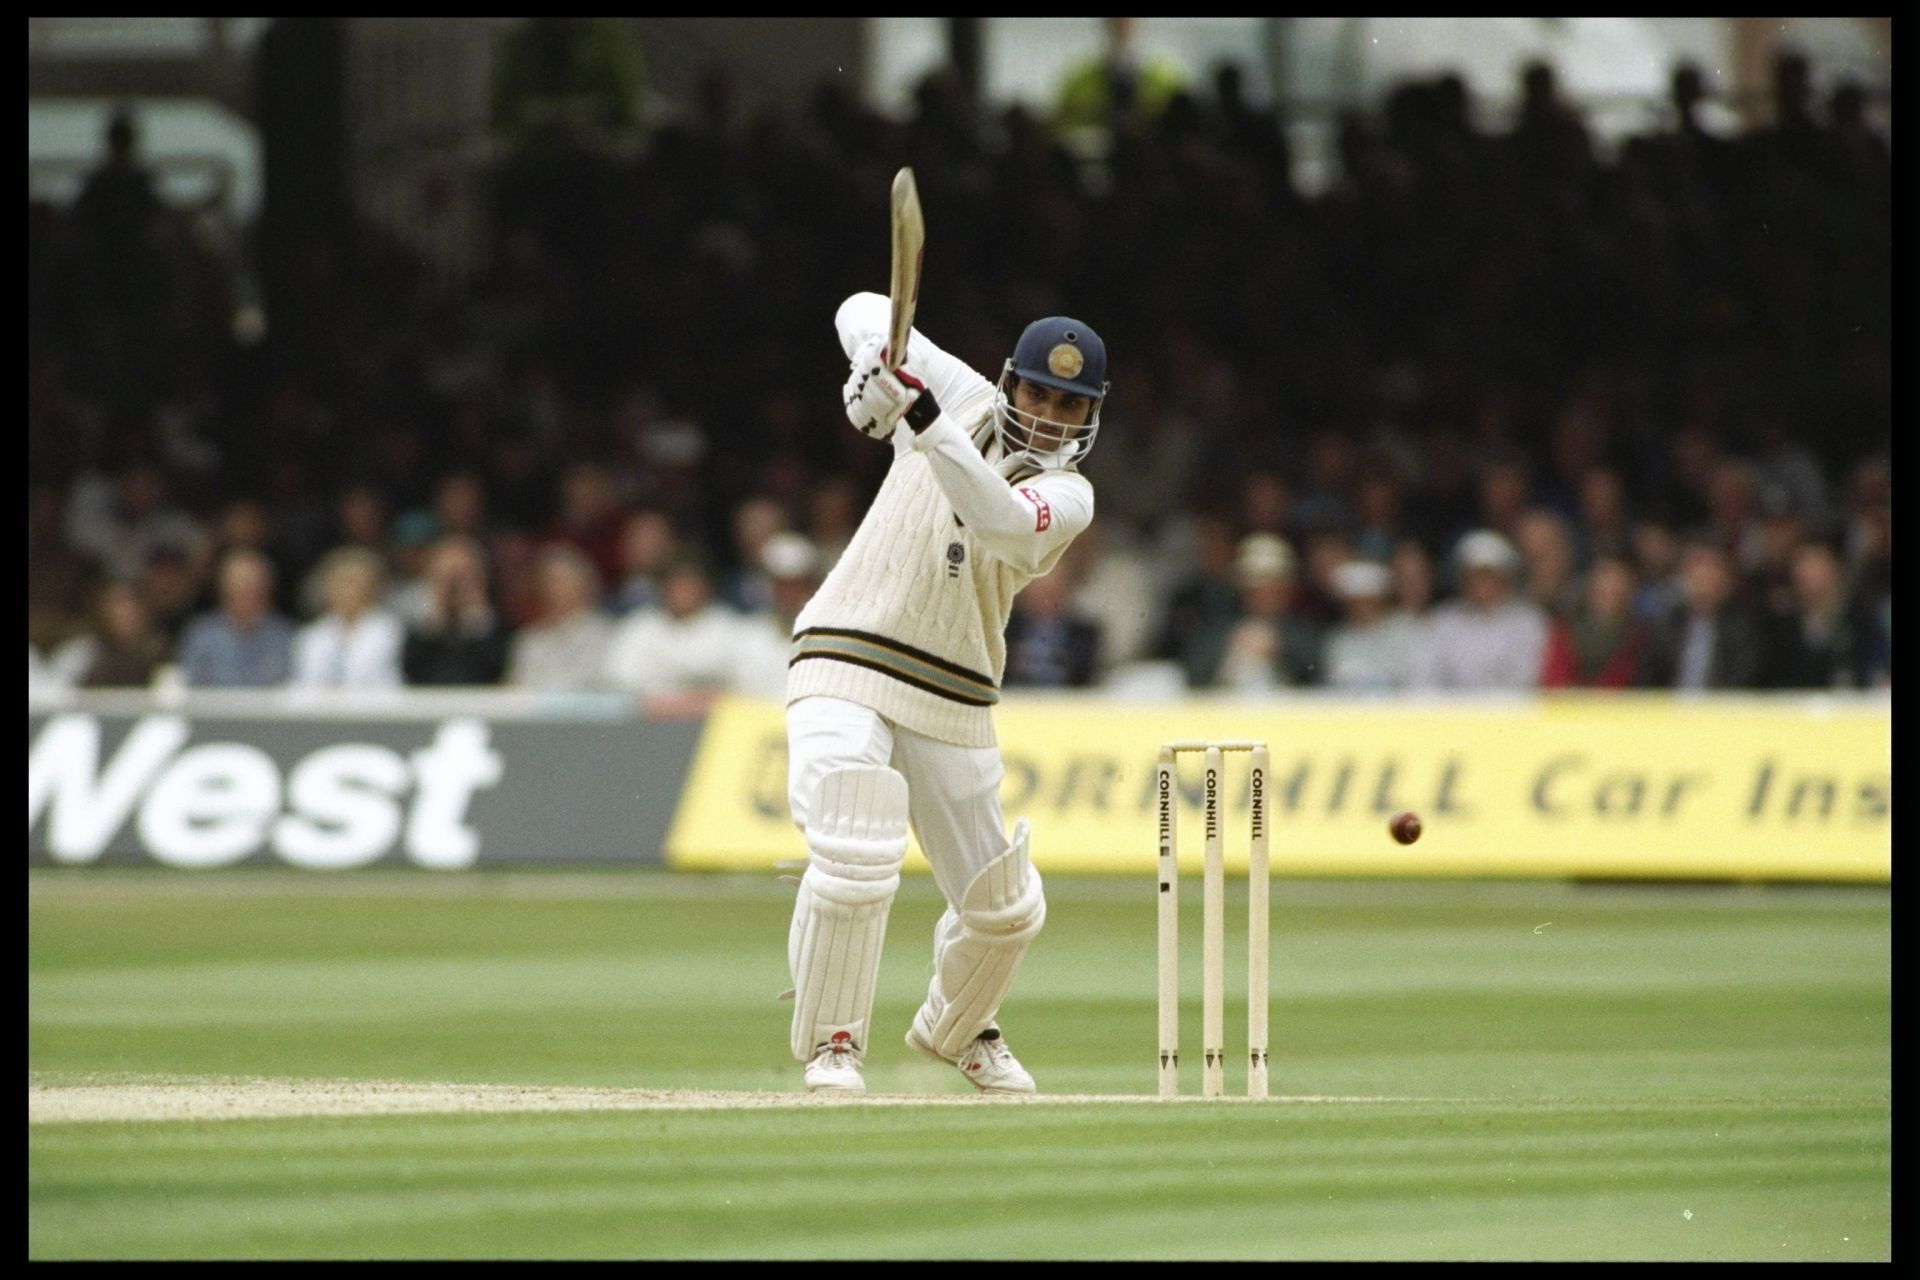 Sourav Ganguly scored a memorable hundred on his Test debut at Lord&rsquo;s. (Pic: Getty Images)